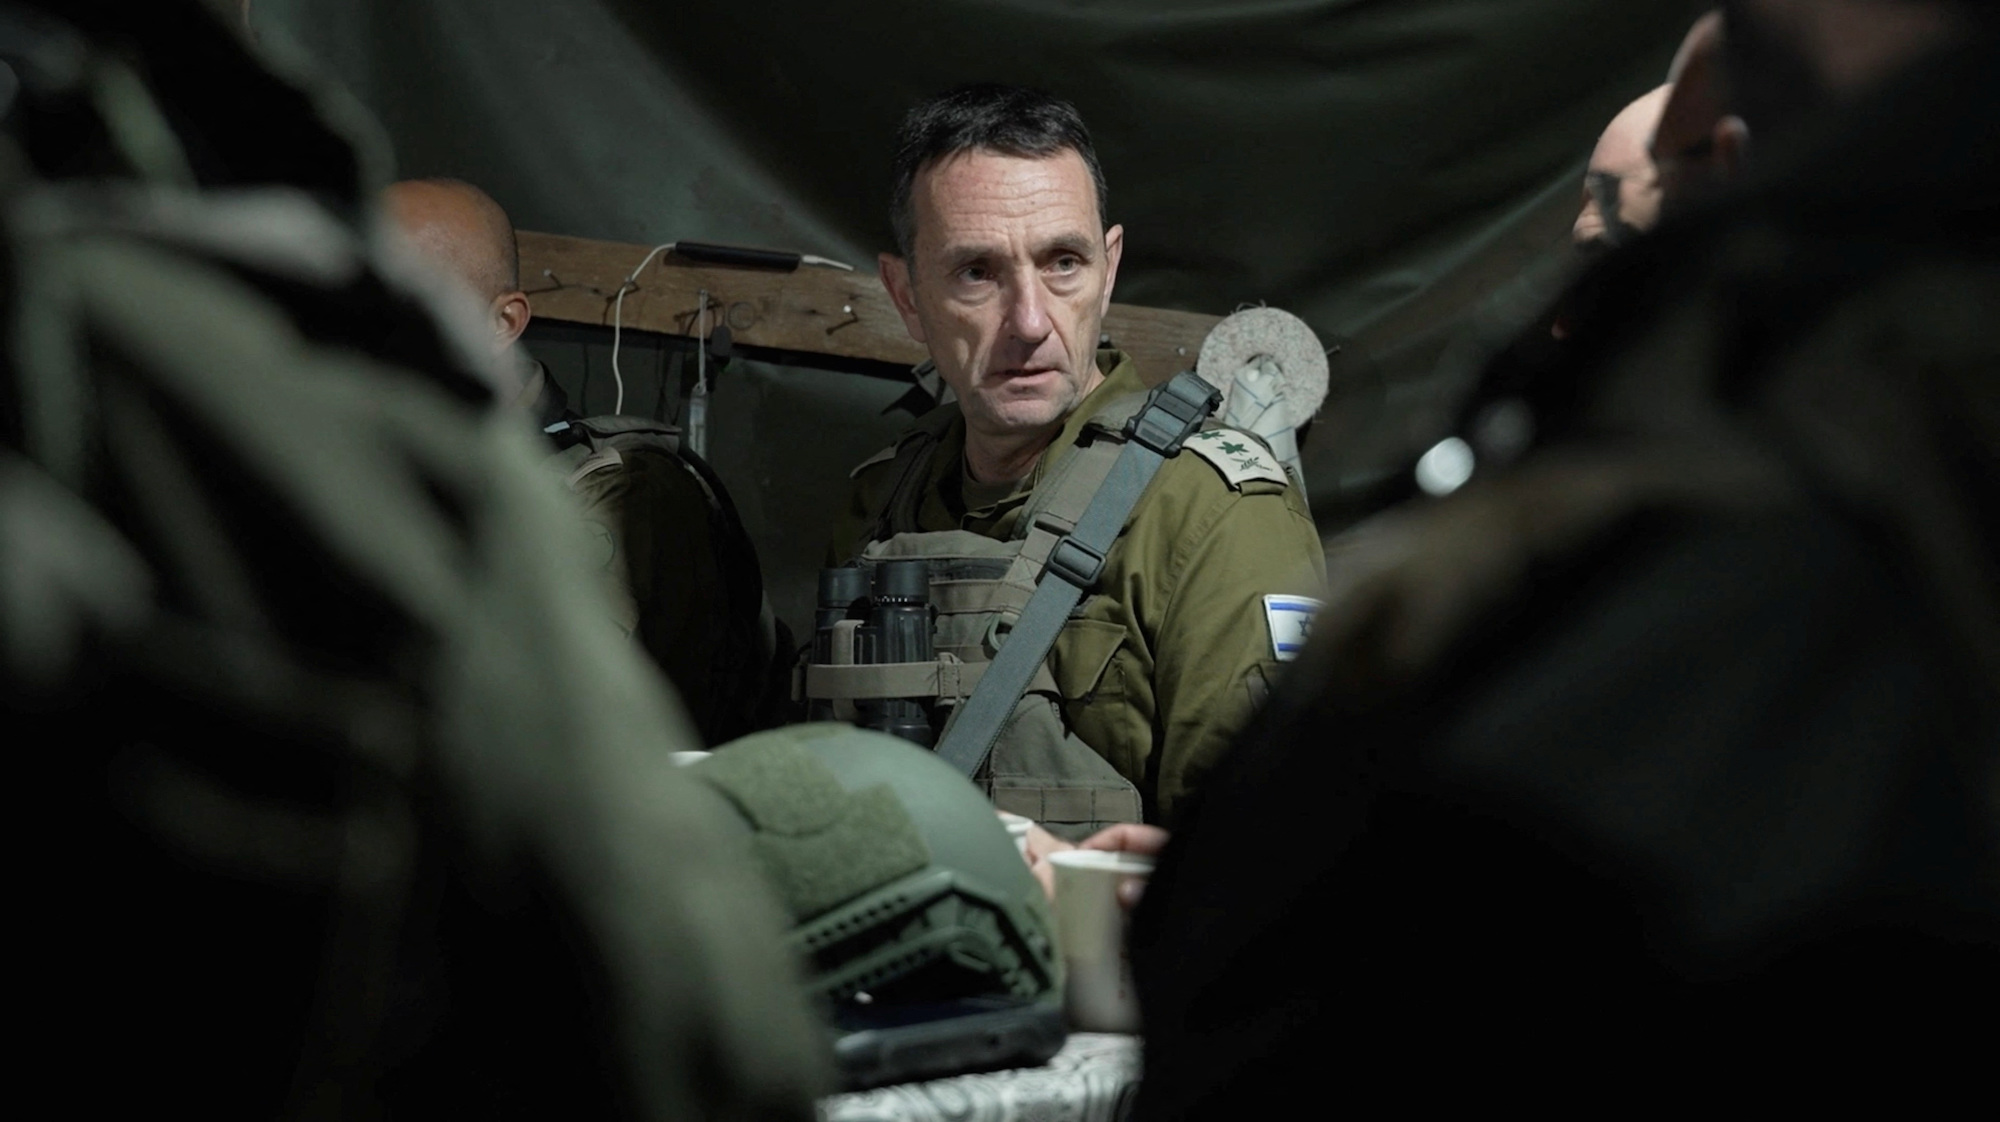 Israeli military Chief of General Staff Herzi Halevi looks on while visiting a location given an undisclosed location in northern Israel on January 3.